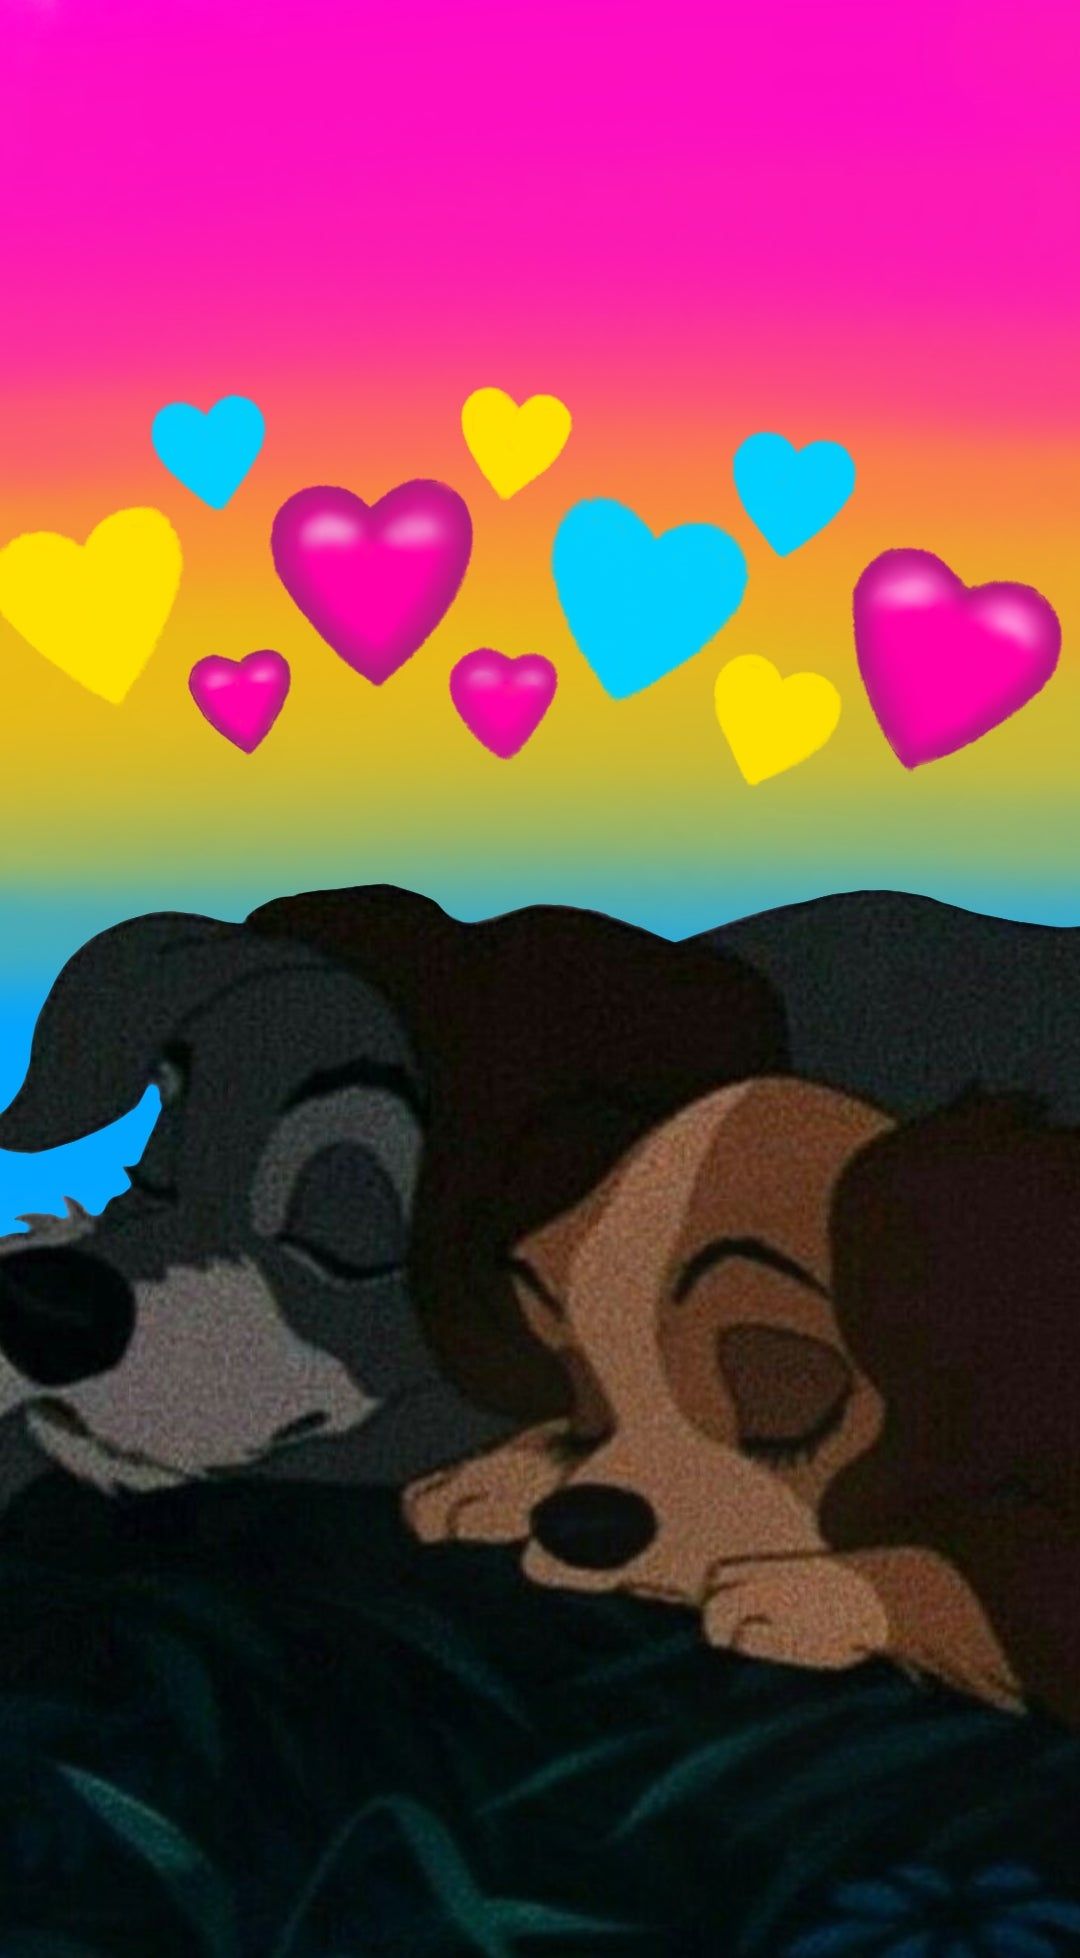 IPhone wallpaper of two dogs cuddling with hearts in the background - Pansexual